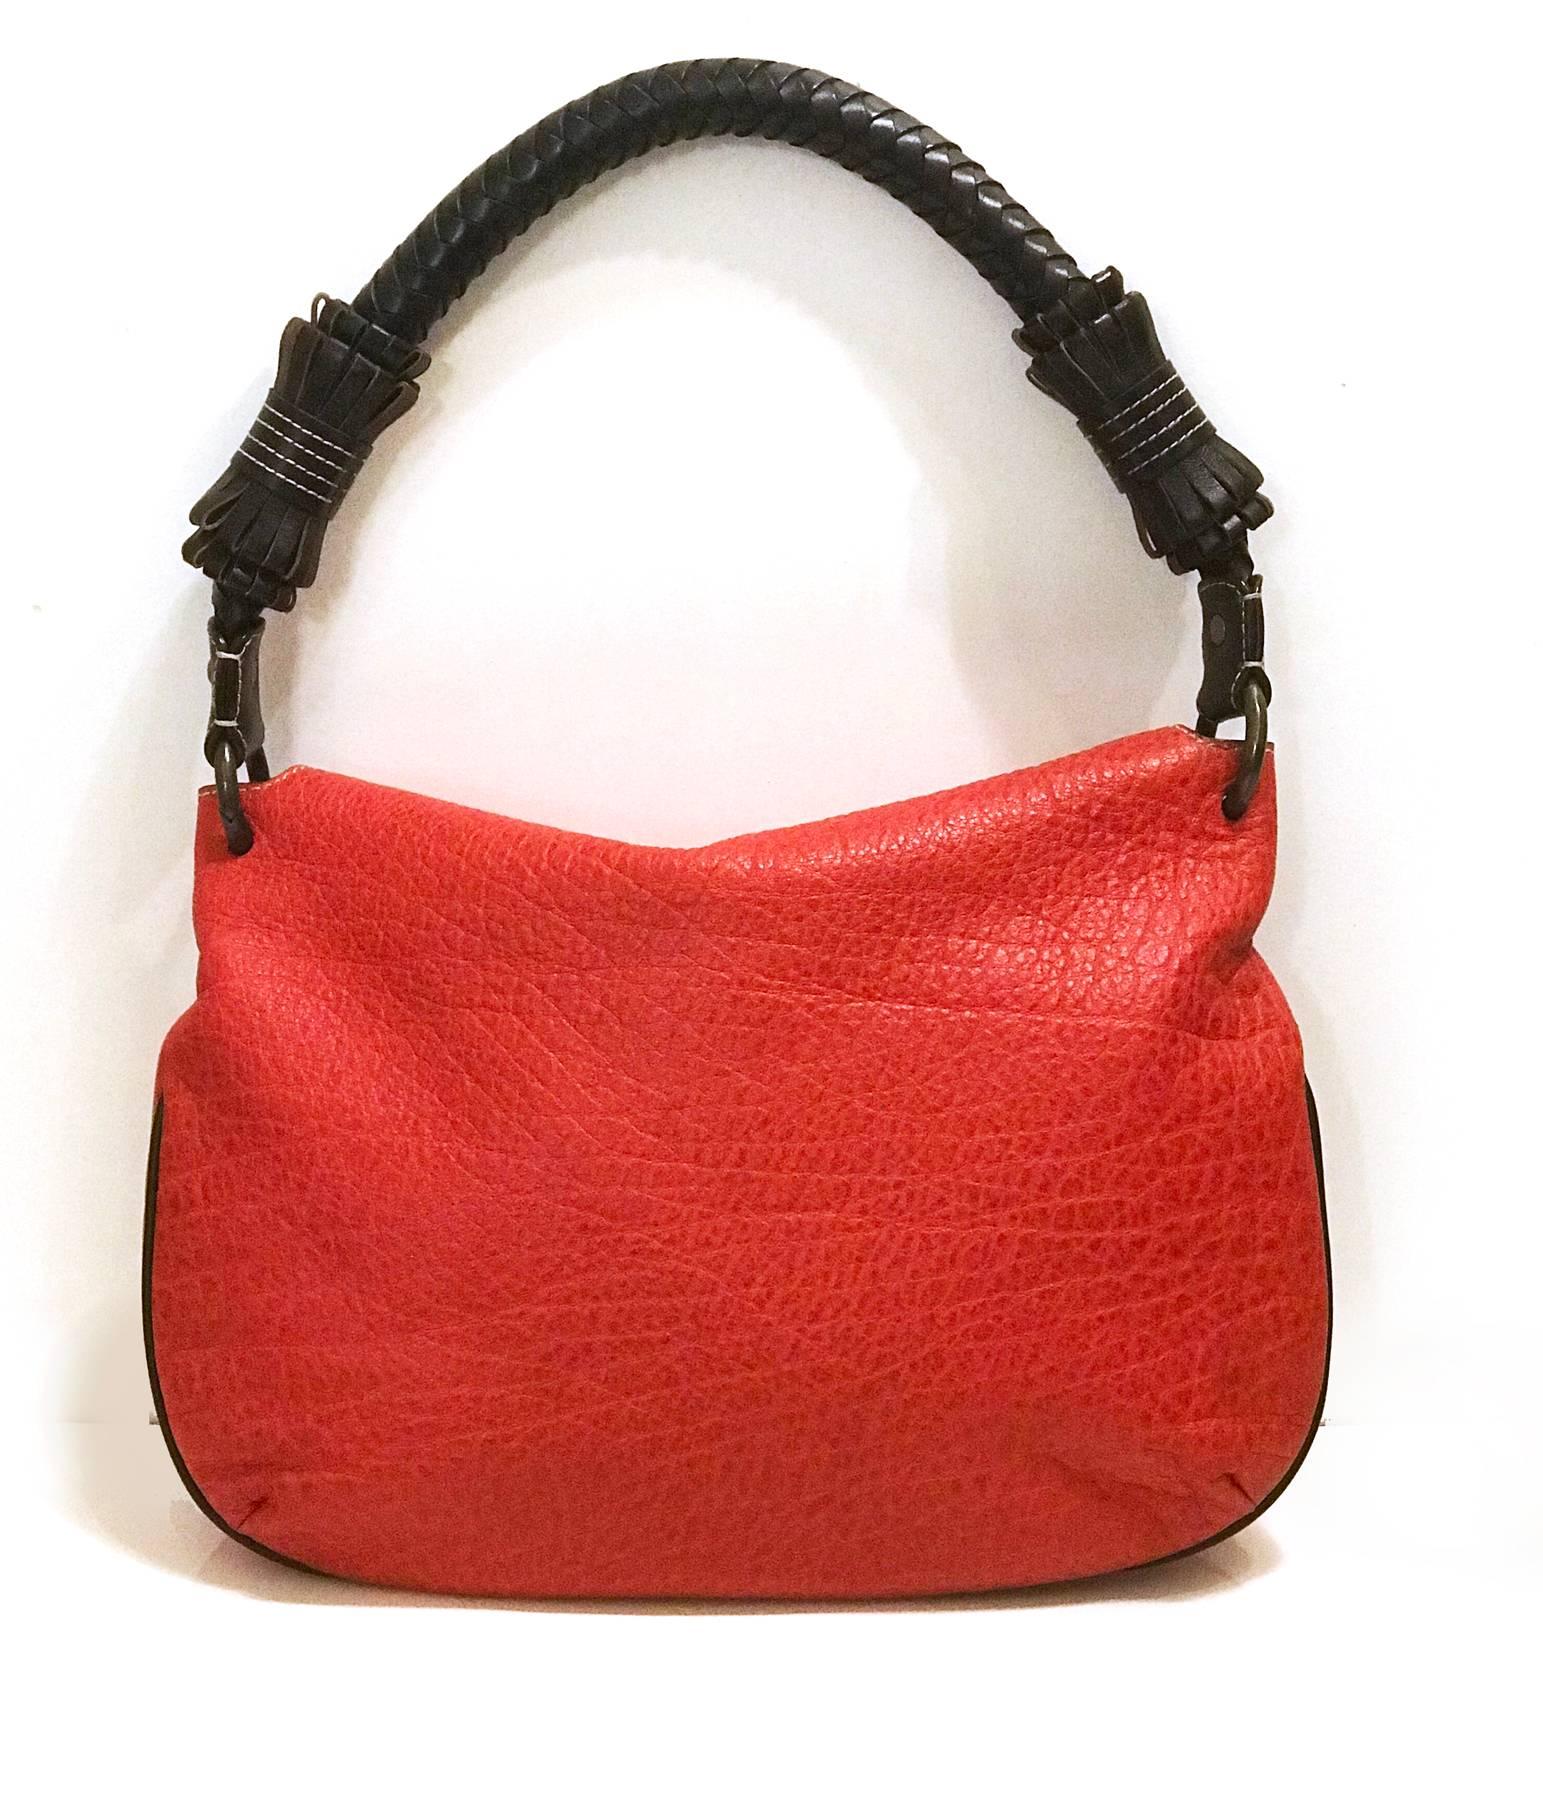 Impressive red hobo bag by Carolina Herrera, with a thick brown braided leather strap.
On the front of the bag the CHHC logo is printed in gold. The inside lining is brown with logo pattern and has a pocket with zip.
Strap is 56cm long.